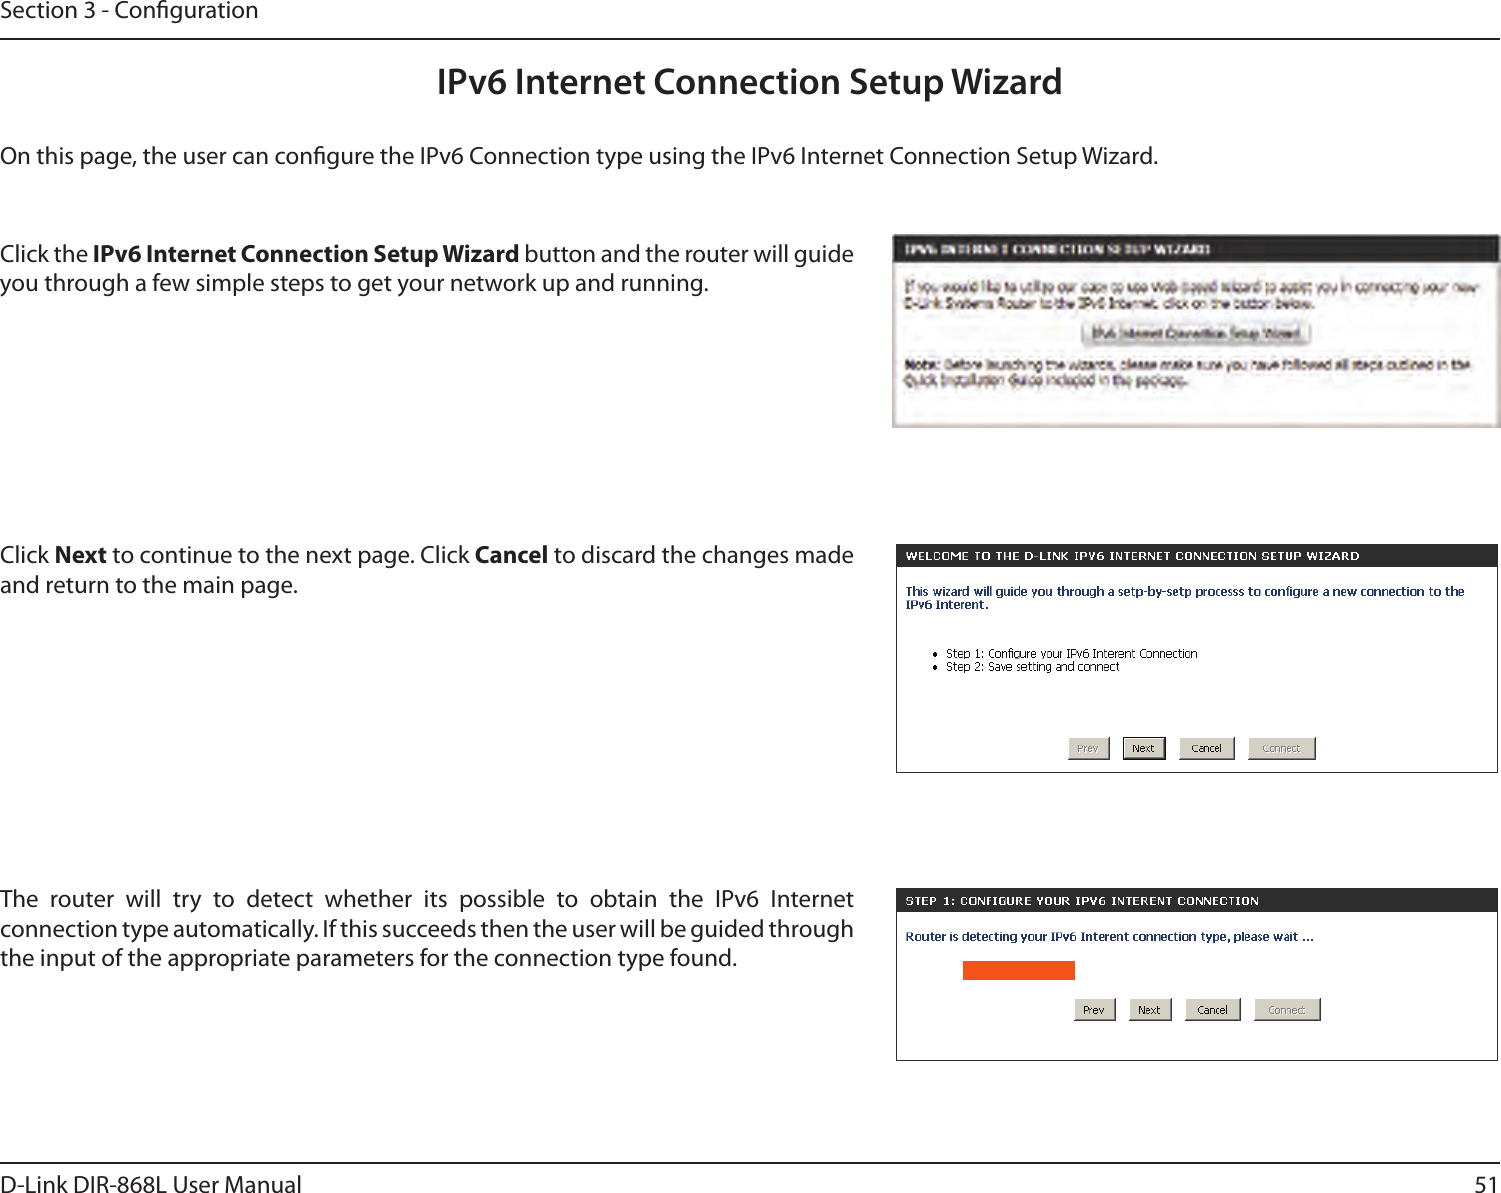 51D-Link DIR-868L User ManualSection 3 - CongurationIPv6 Internet Connection Setup WizardOn this page, the user can congure the IPv6 Connection type using the IPv6 Internet Connection Setup Wizard.Click the IPv6 Internet Connection Setup Wizard button and the router will guide you through a few simple steps to get your network up and running.Click Next to continue to the next page. Click Cancel to discard the changes made and return to the main page.The  router  will  try  to  detect  whether  its  possible  to  obtain  the  IPv6  Internet connection type automatically. If this succeeds then the user will be guided through the input of the appropriate parameters for the connection type found.